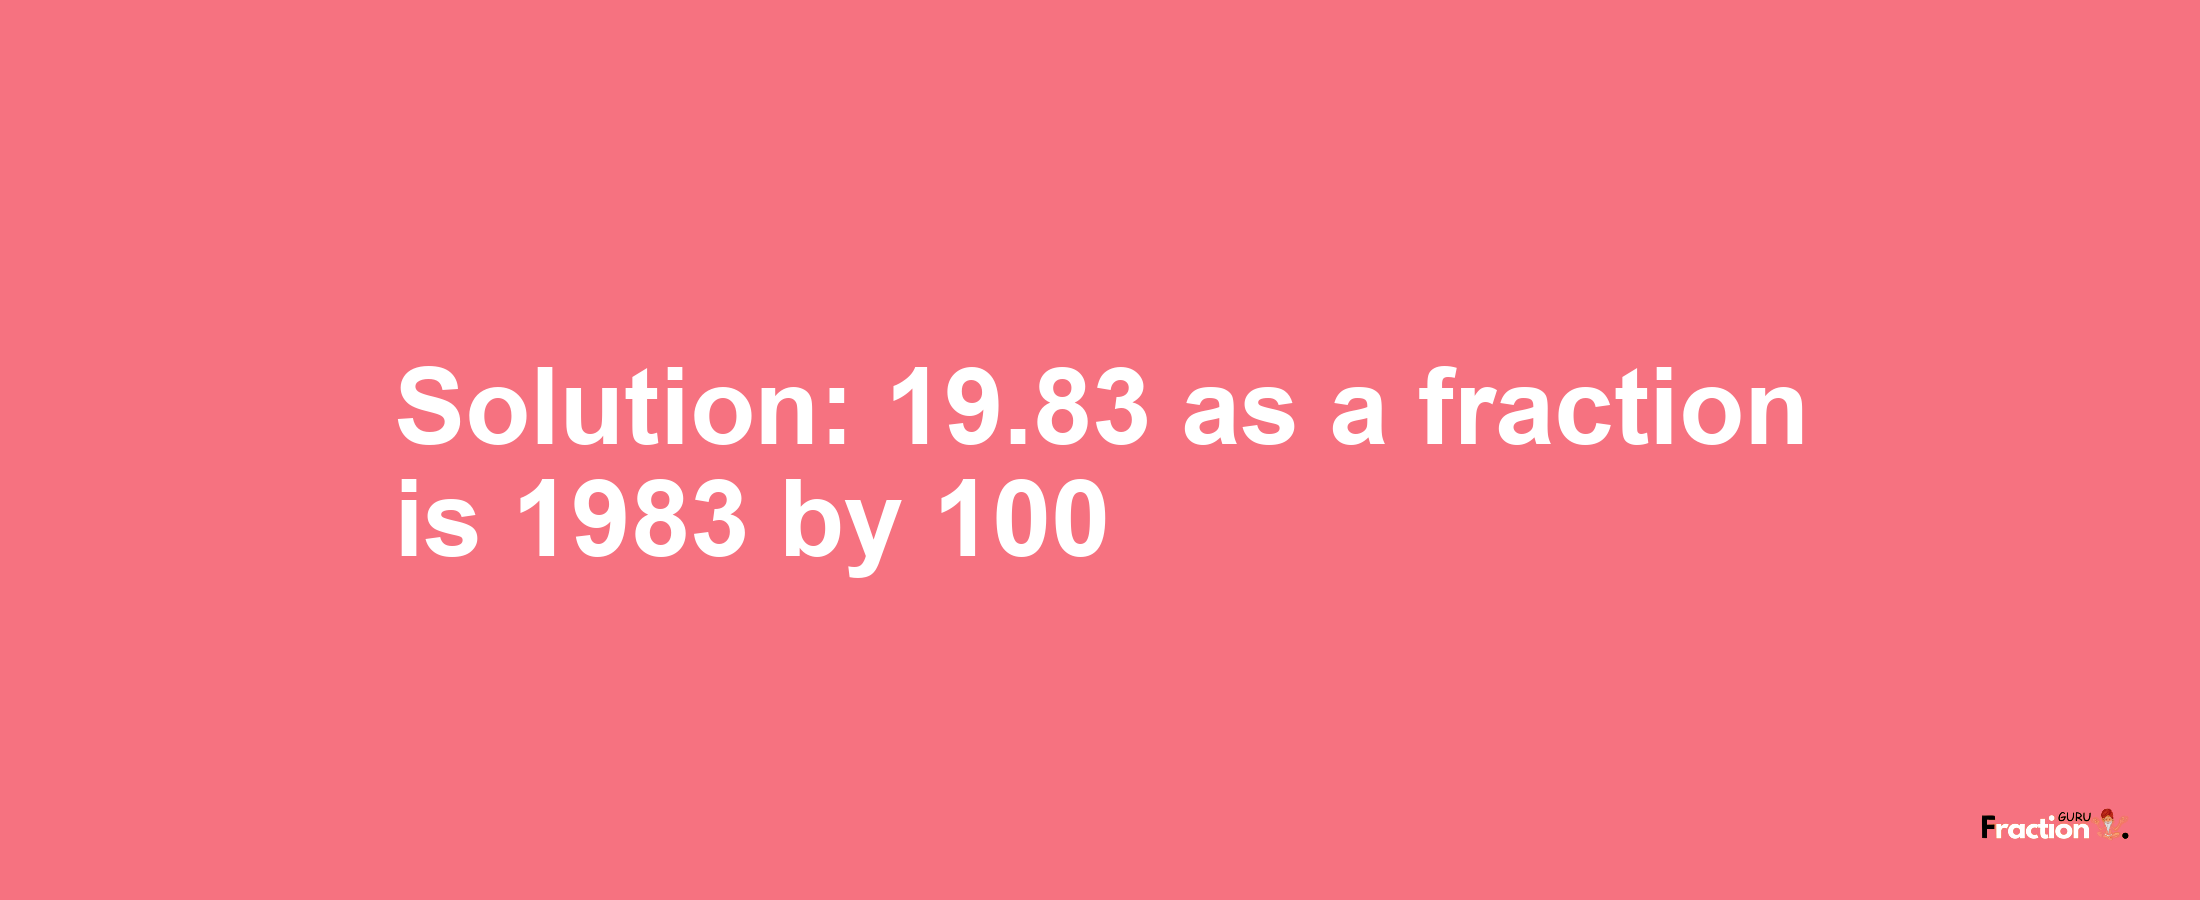 Solution:19.83 as a fraction is 1983/100